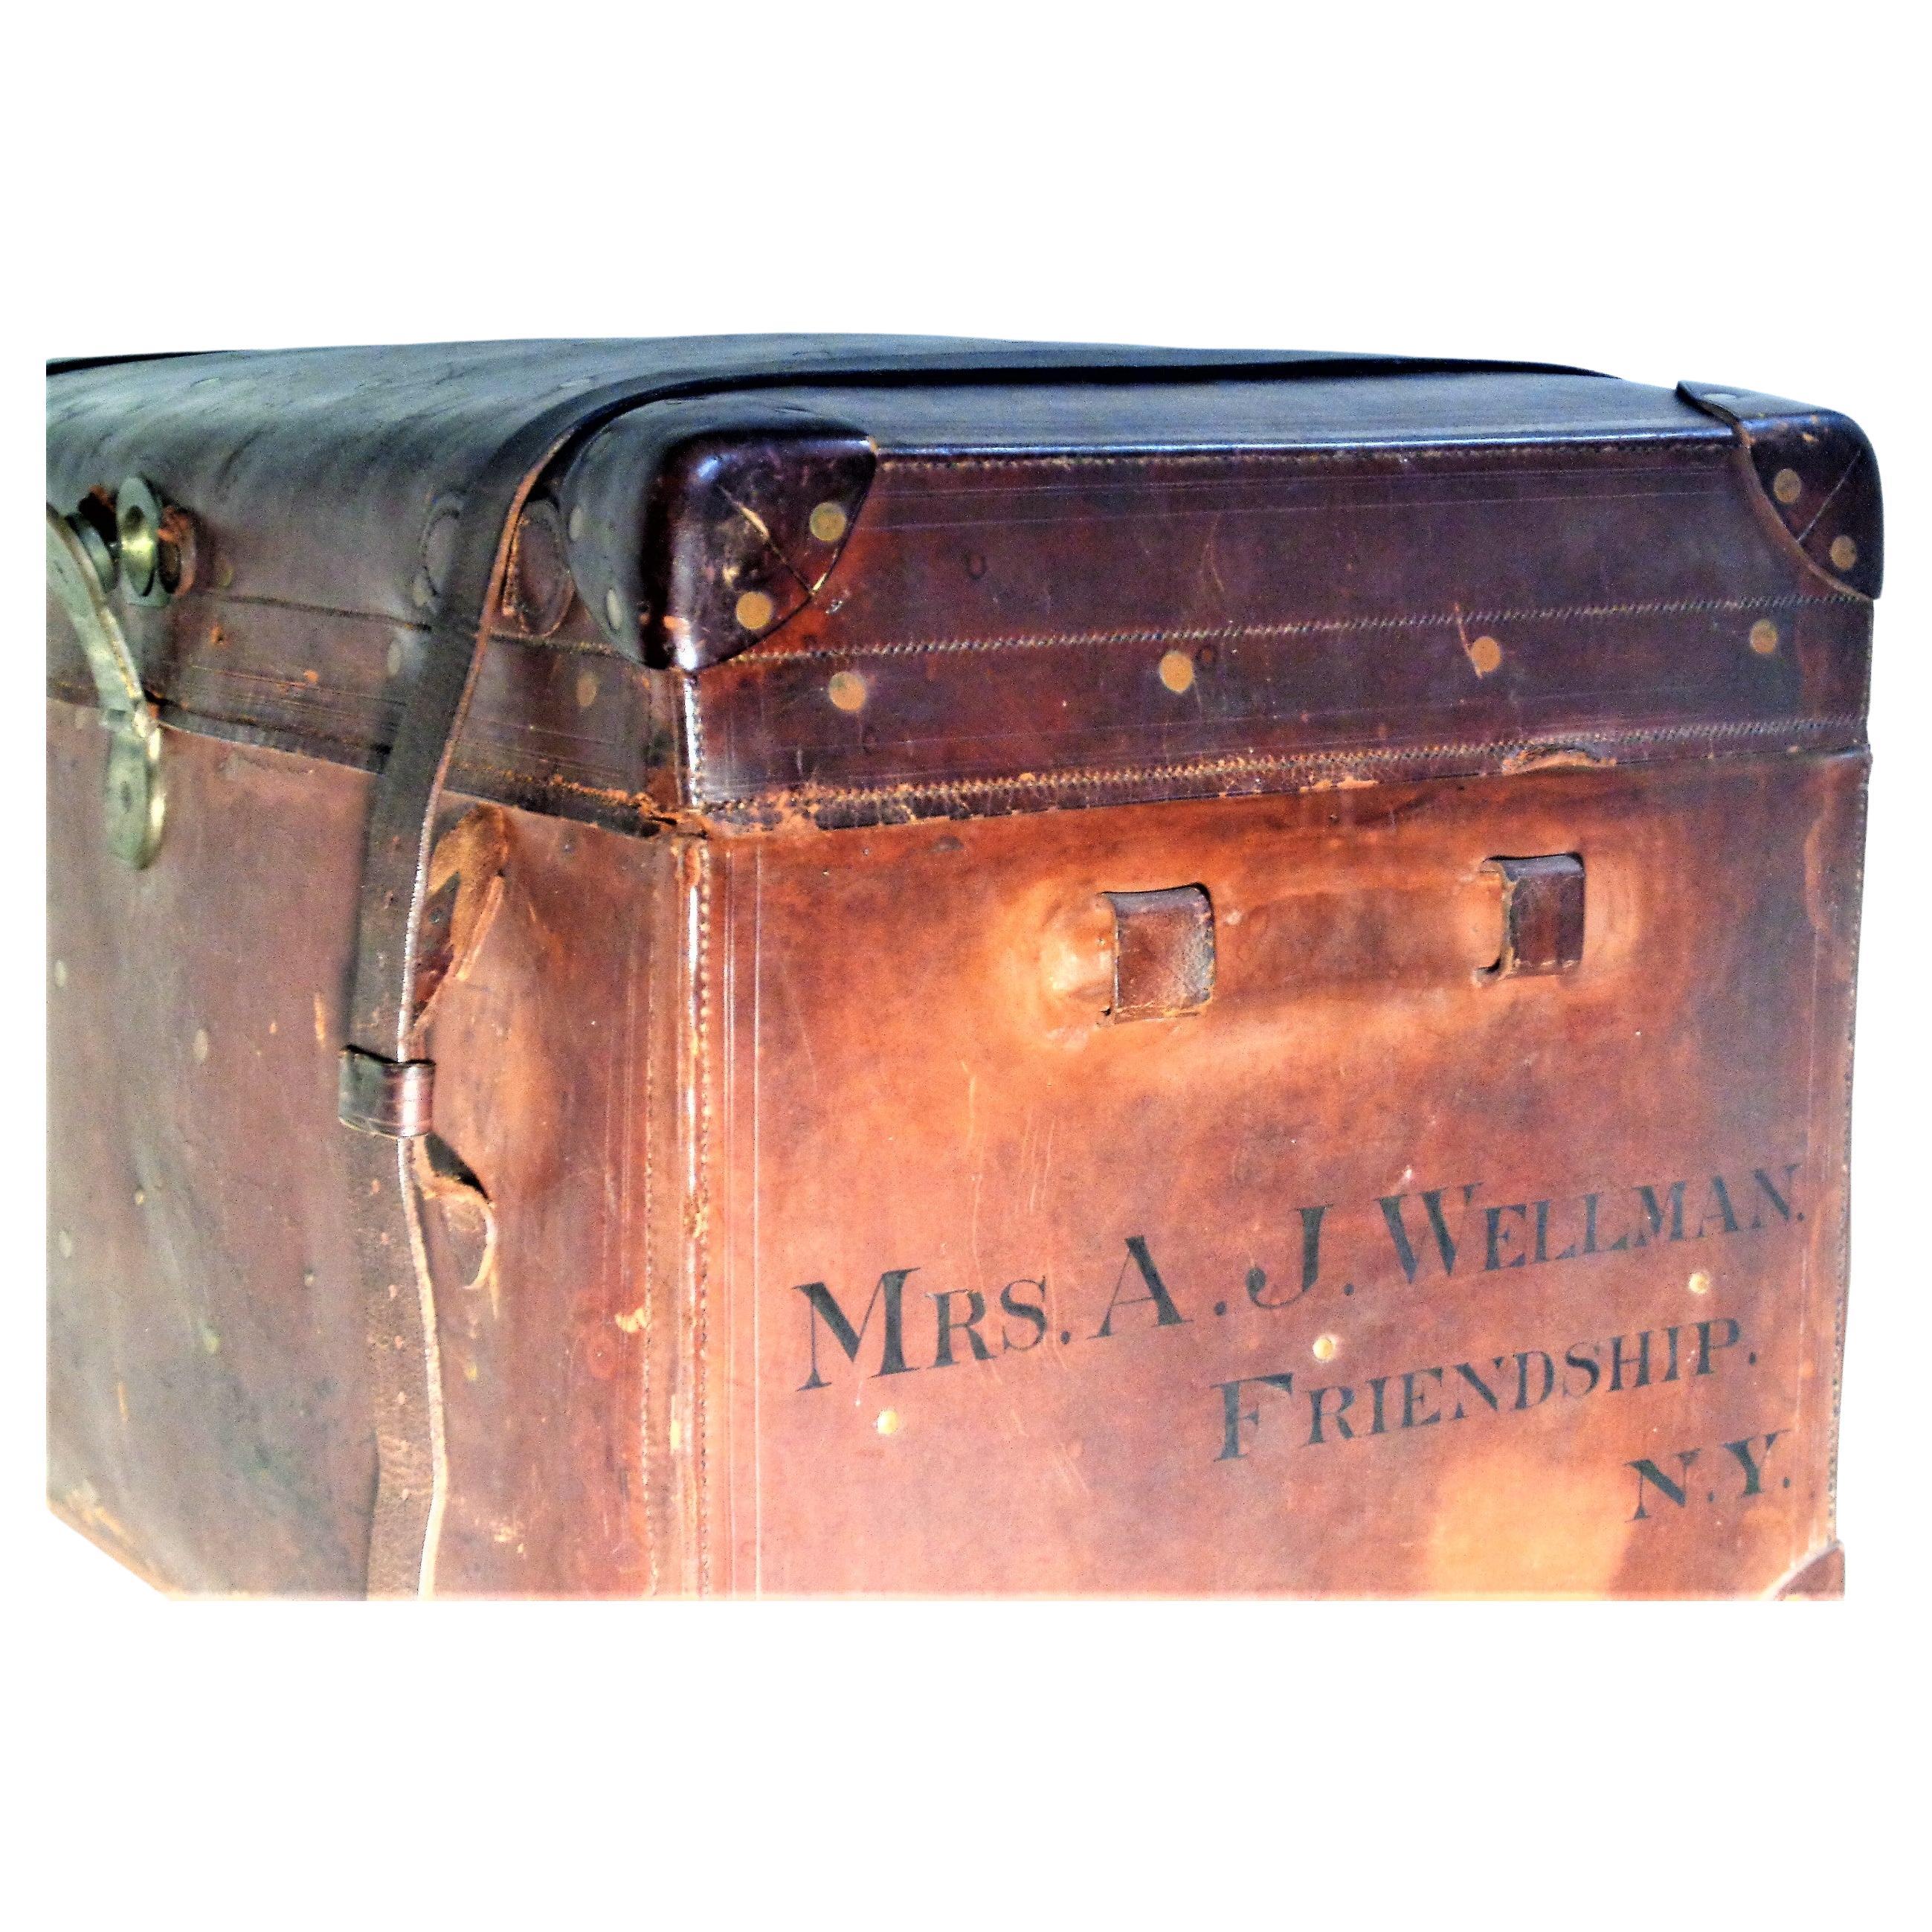 A large 19th century American brass riveted leather travel trunk in nicely aged original surface color patina to leather and brass. Ink stamped at both sides with owners name - Mrs. A.J. Wellman, Friendship NY ( information about this historically